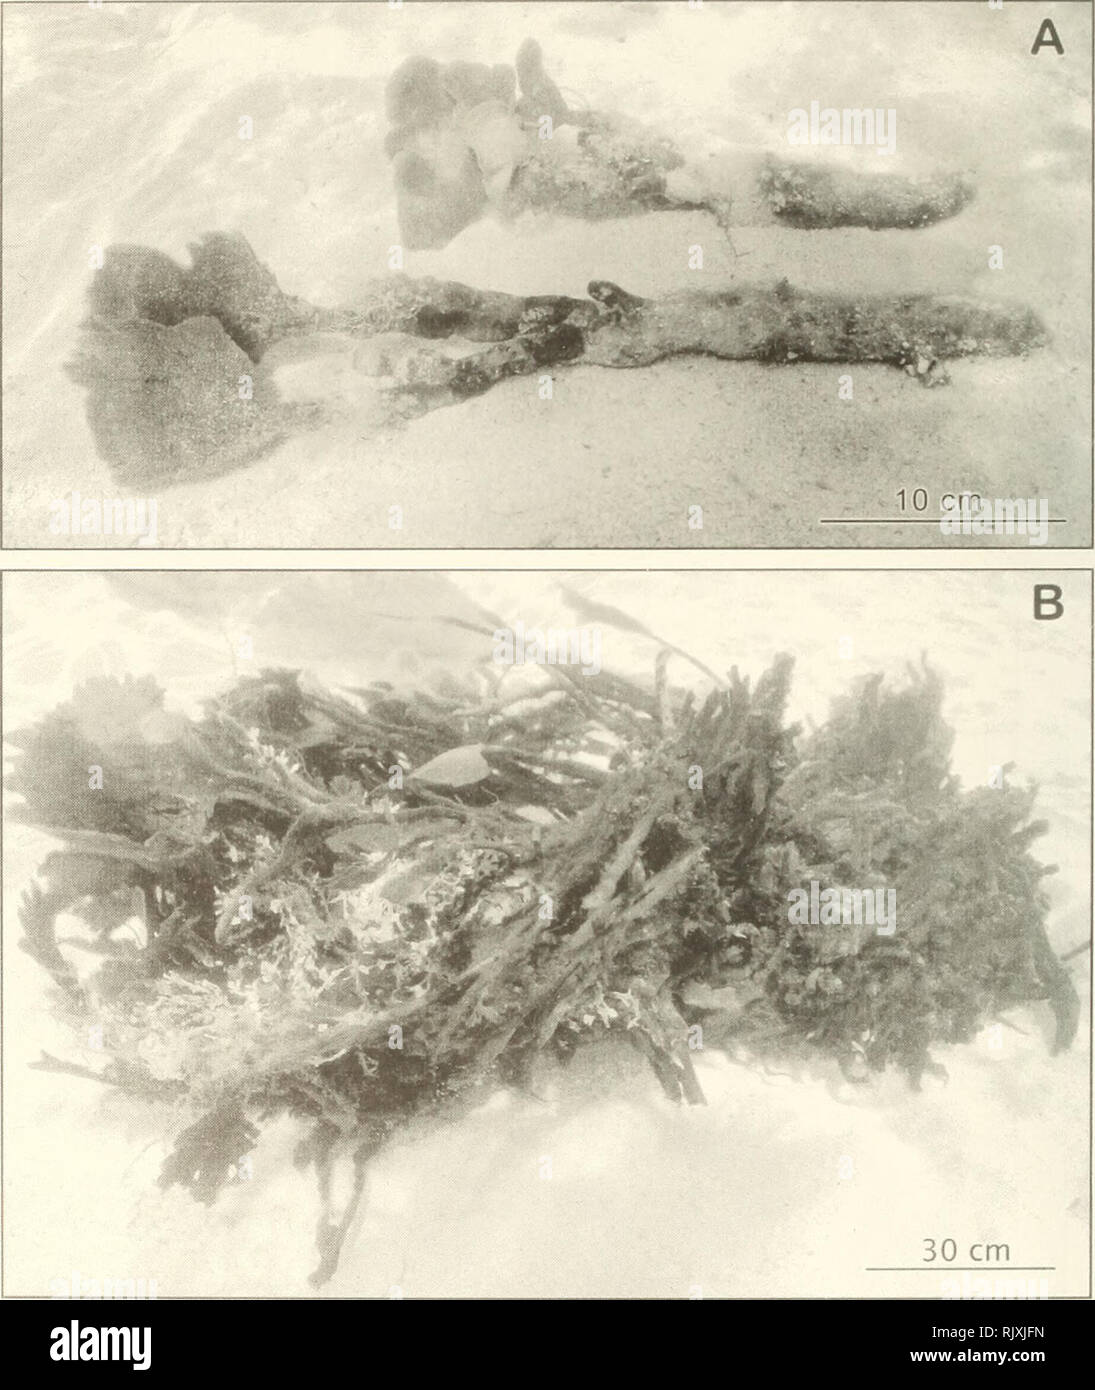 . Atoll research bulletin. Coral reefs and islands; Marine biology; Marine sciences. 16 We also discovered unexpected evidence in further support of the coloniality hypothesis in the case of Avrainvillea longicaulis f. laxa. We found that the colonial morphology is uniquely reinforced by the intermingling of blade and stipe siphons at areas of contact (Figs. 19,25). Contact frequently occurs for prolonged periods in such calm habitats, leading to abundant anastomosing points of fusion/adhesion.. Figure 18. A - Two individuals of Avrainvillea asarifolia f. asarifolia from Curlew Cay. B - Colony Stock Photo